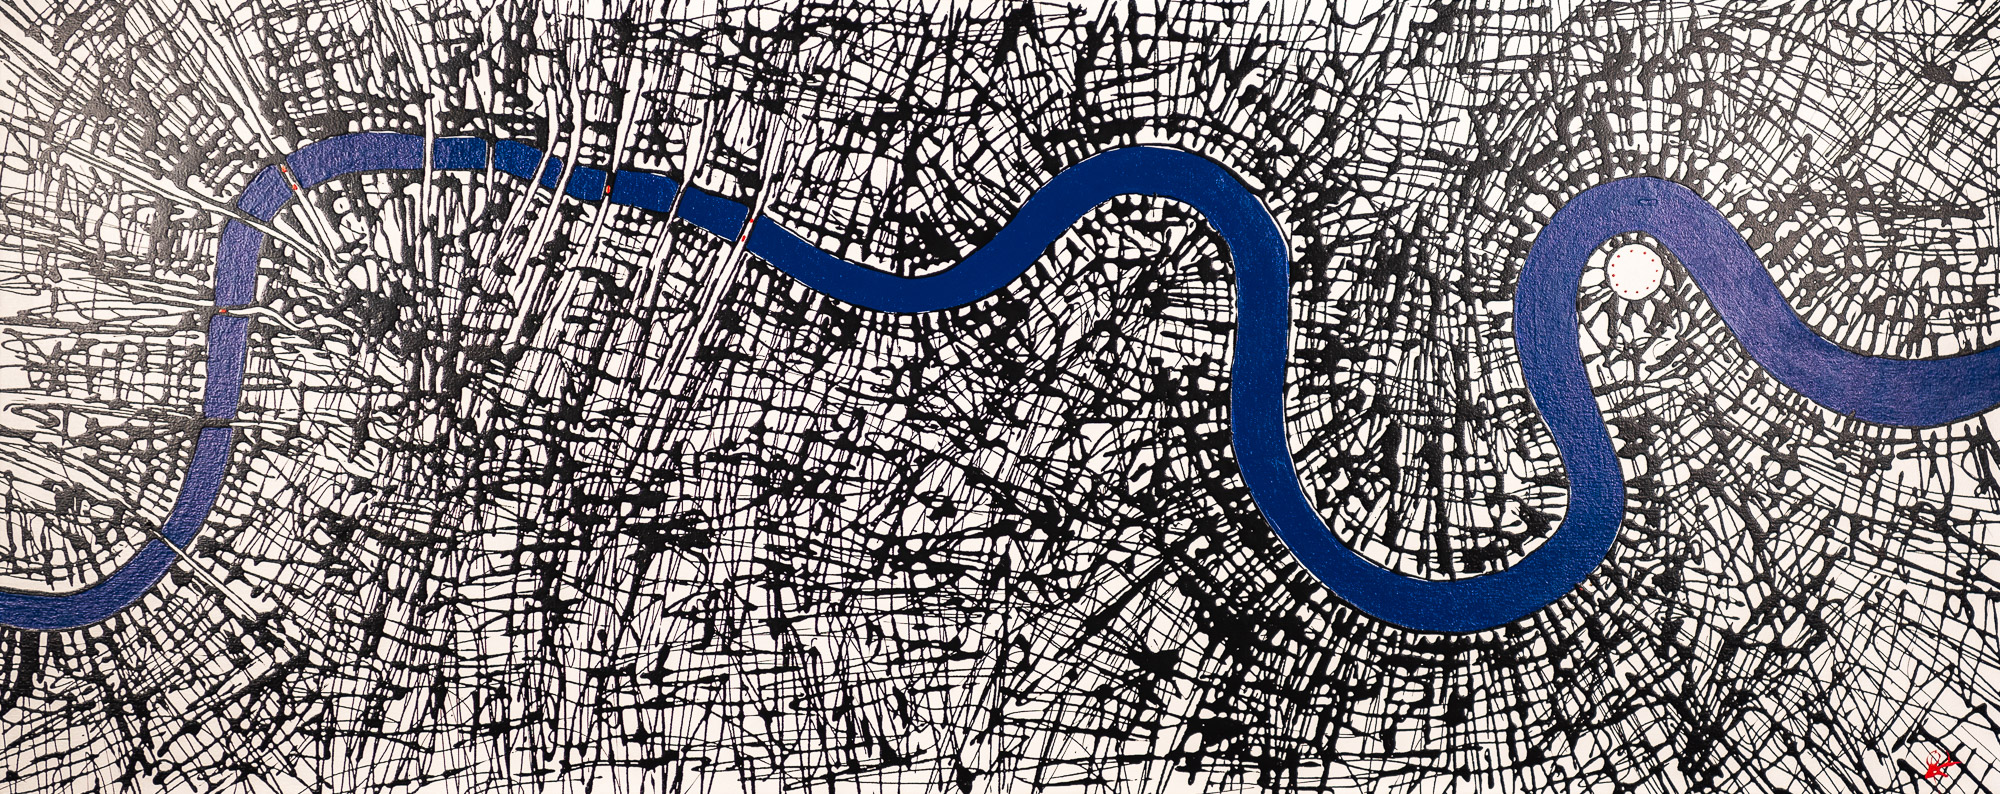 London Current by Paul Kenton, UK Contemporary artist, a River Thames arial view original painting from his London Art Collection